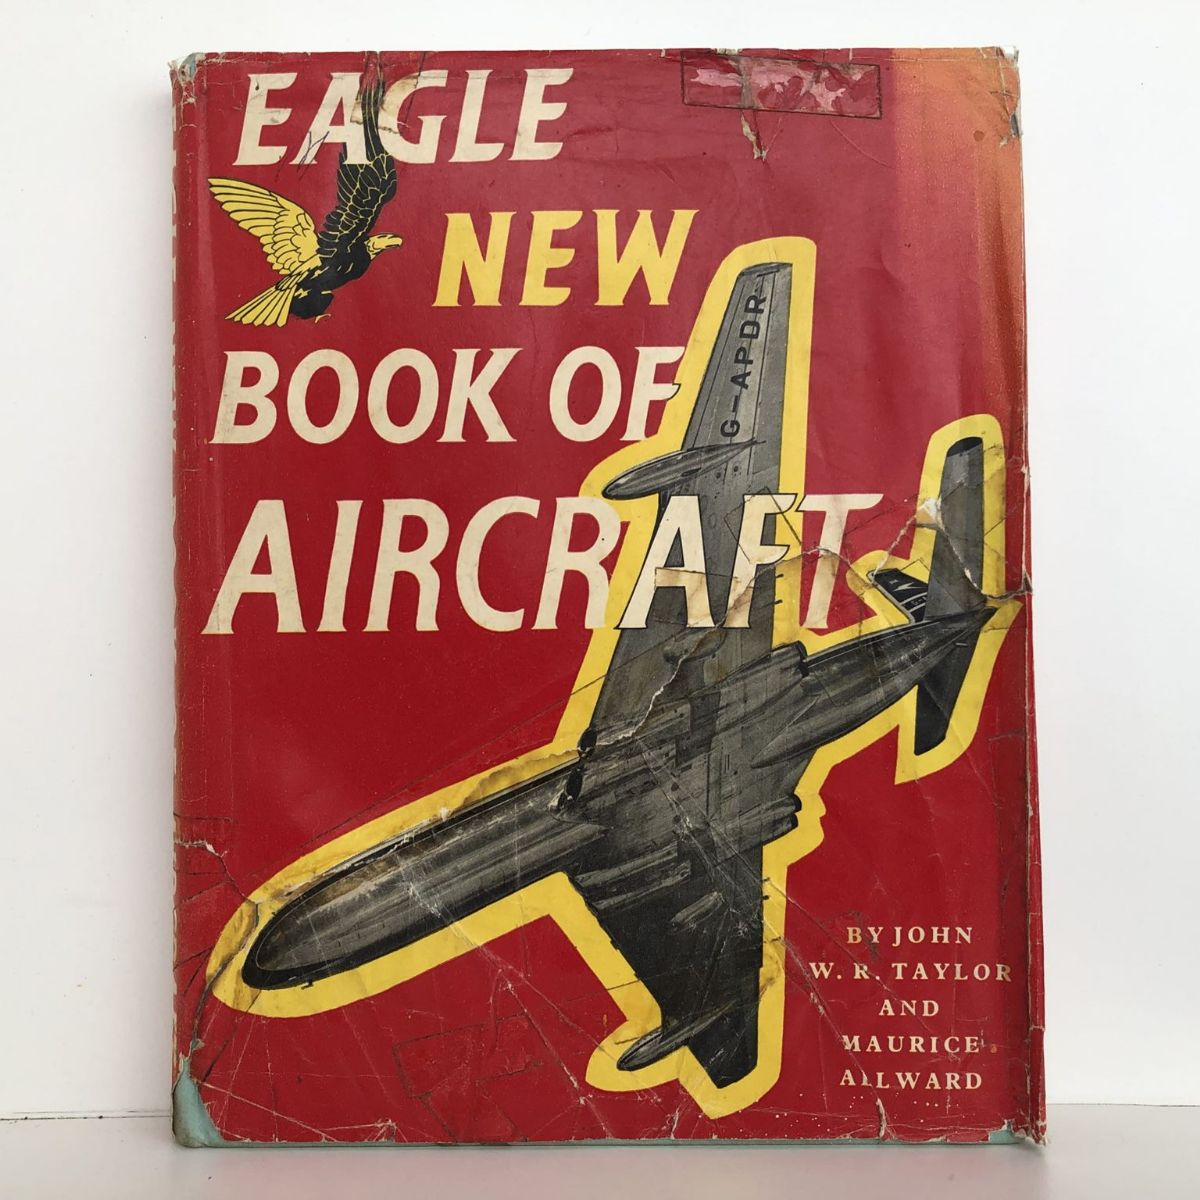 EAGLE NEW BOOK of AIRCRAFT